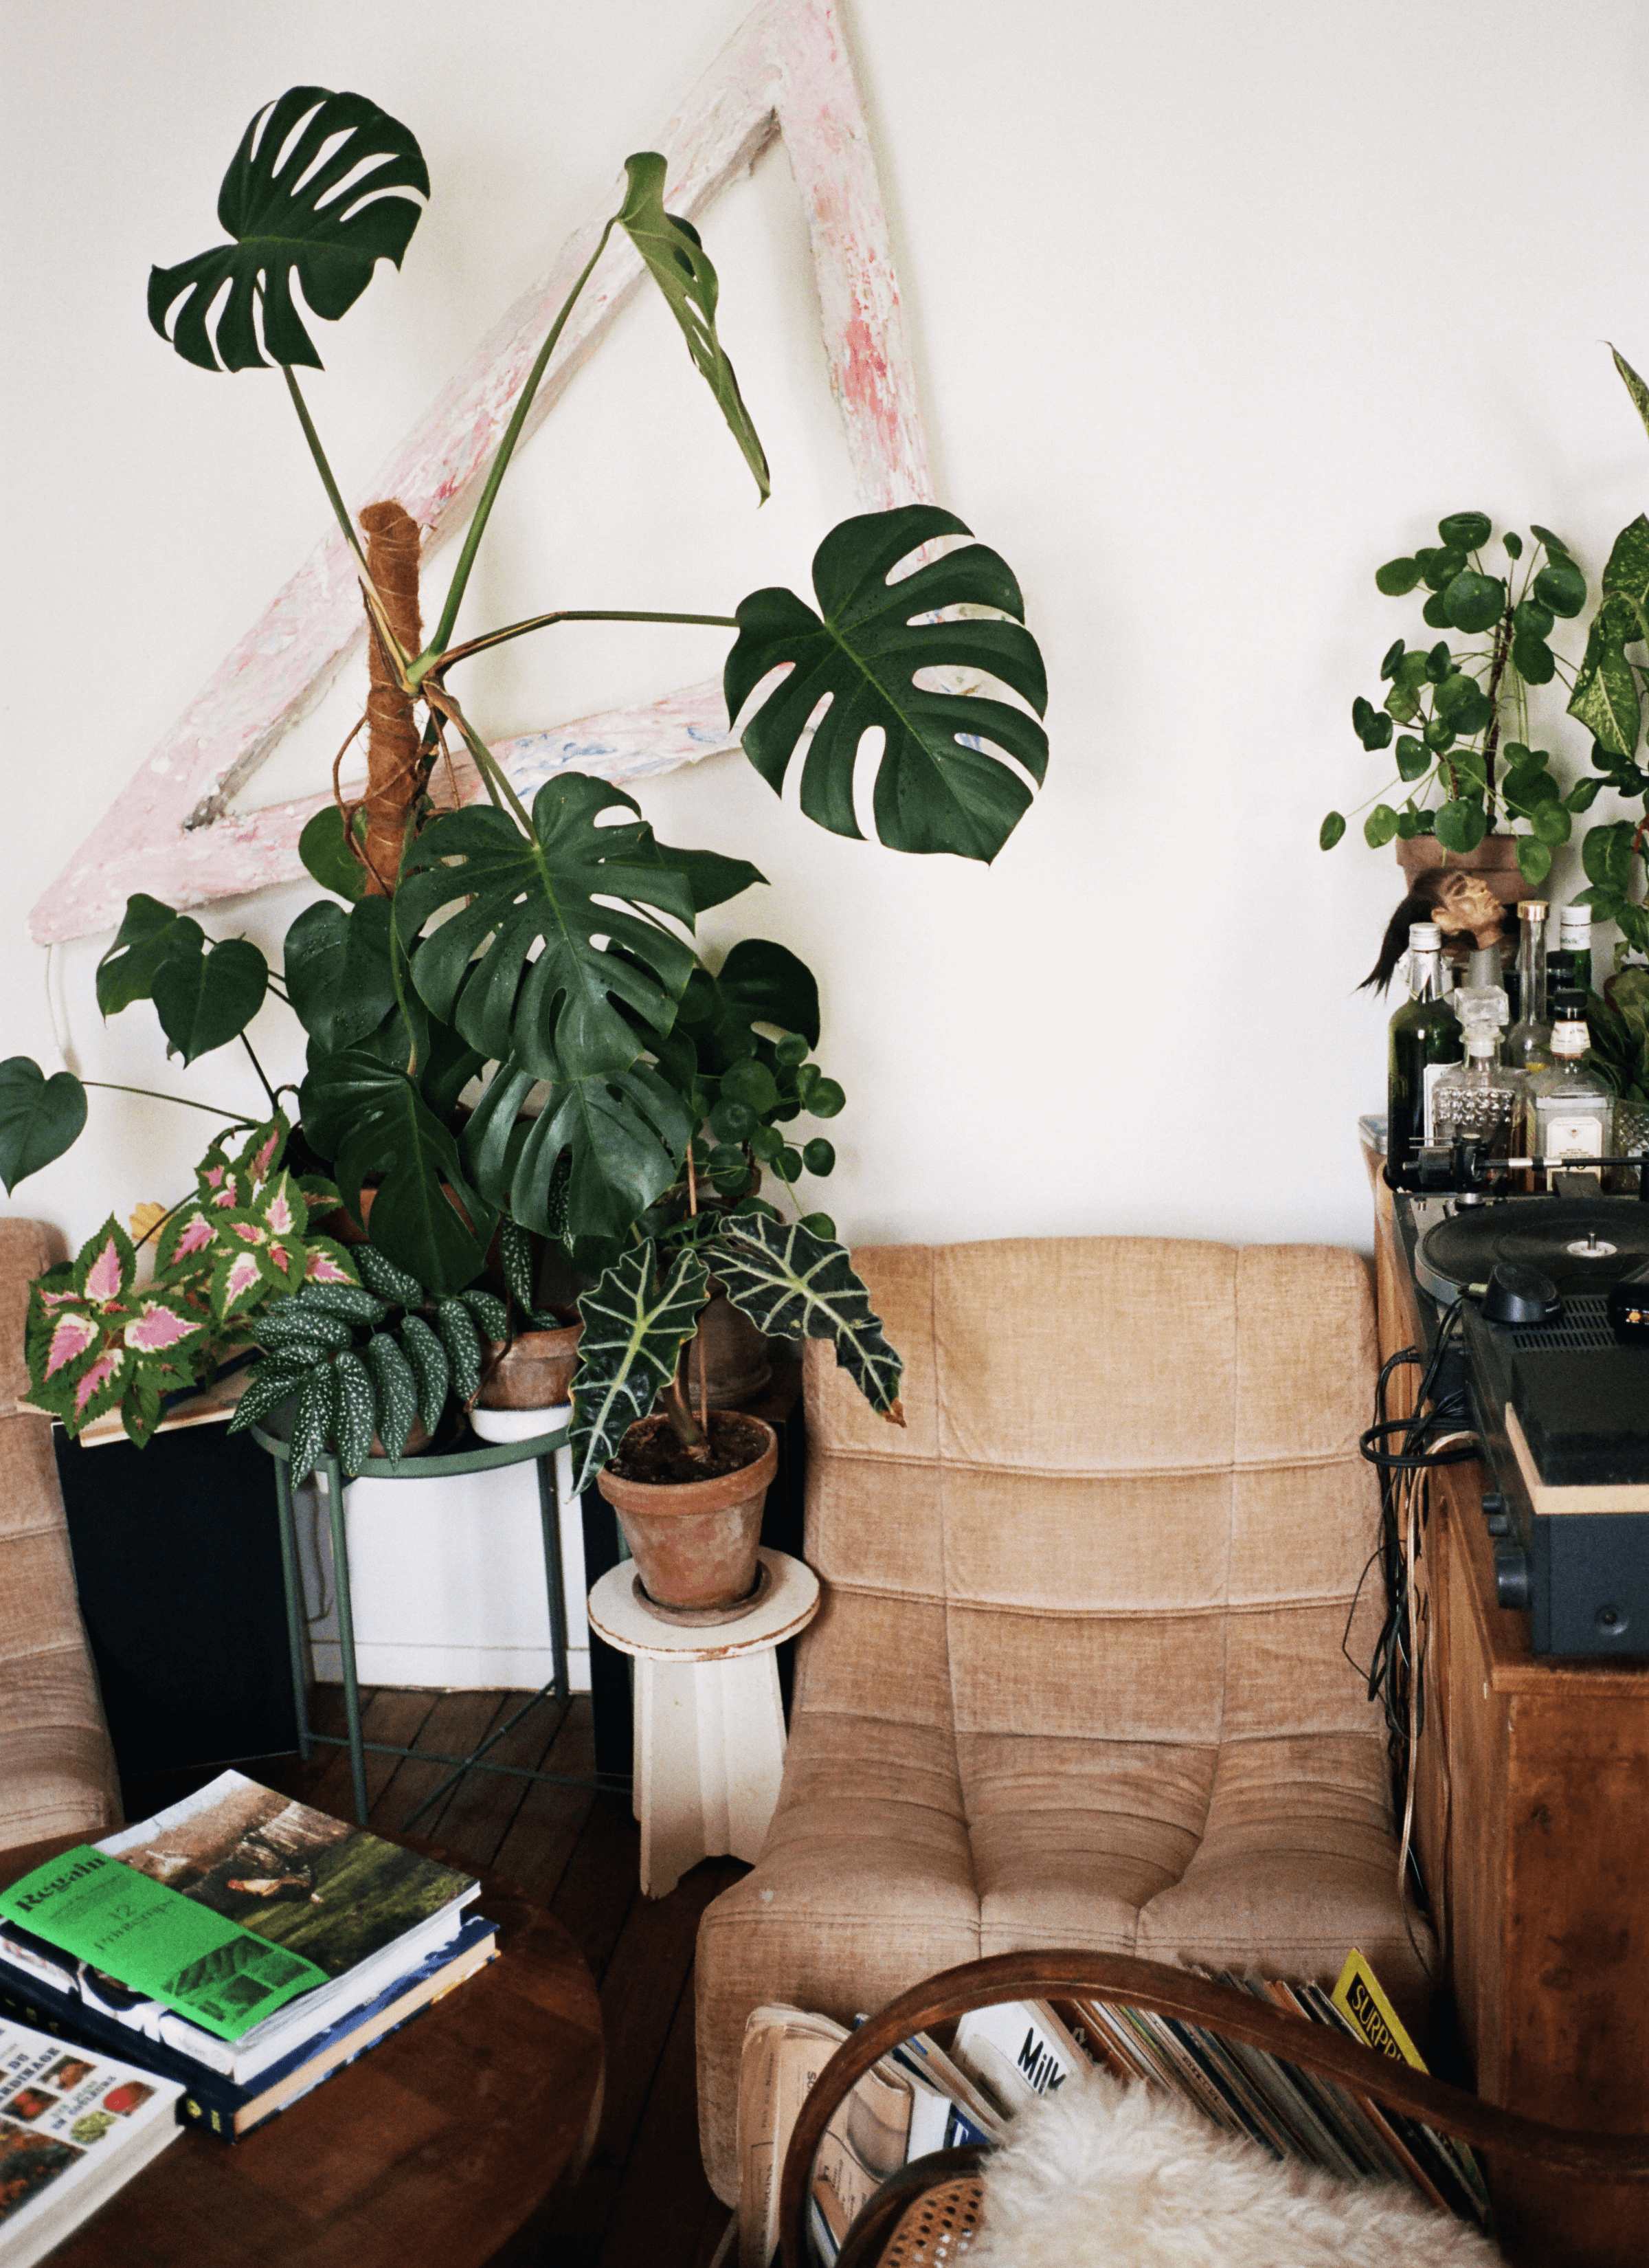 A collection of house plants, Monstera, coleus, heartleaf, Alocasia, Angel wing begonia and Chinese money plant next to a sofa chair while there is a table with a couple of books.